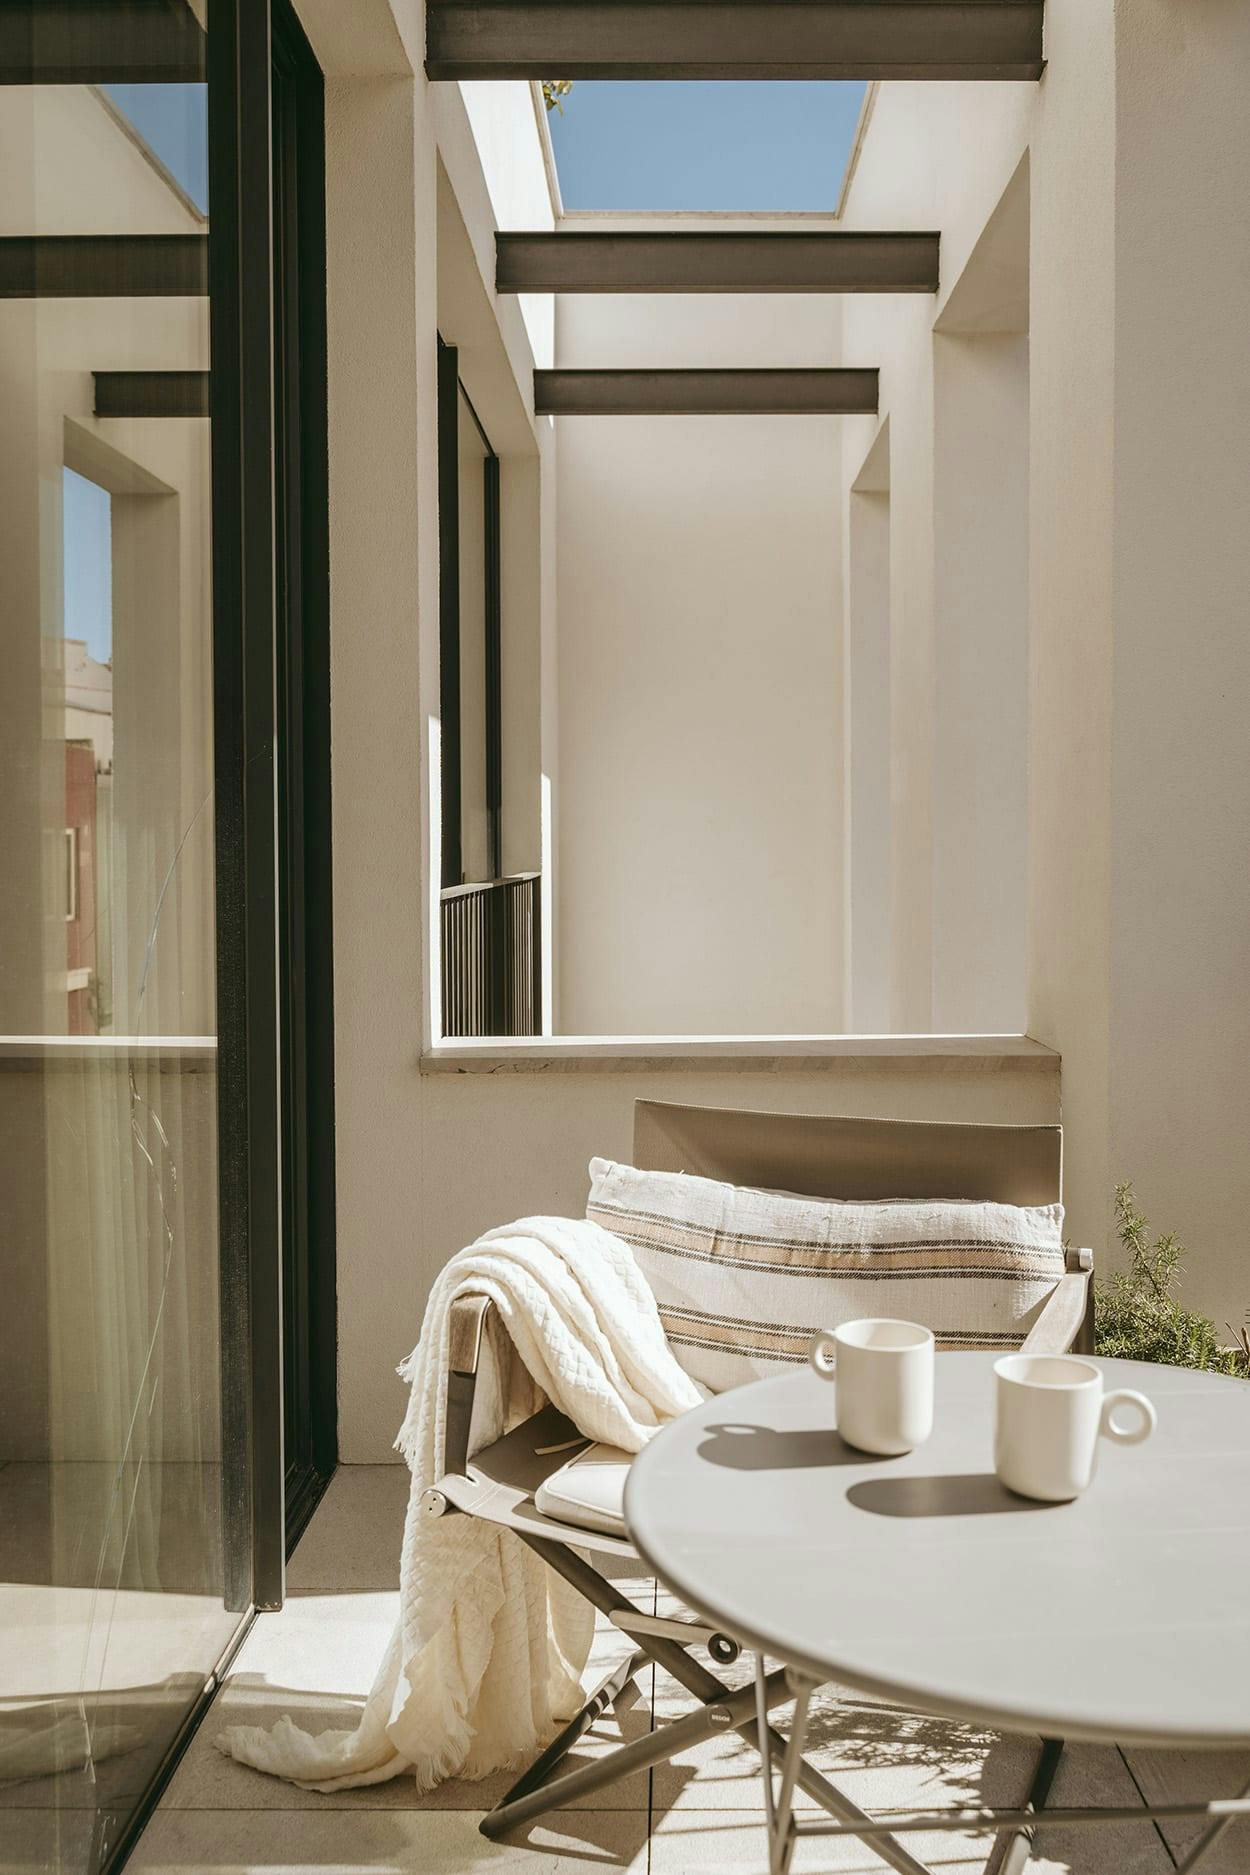 The image features a large, open patio with a white table and chairs, a white table with a cup and a bowl, and a white table with a bowl and a cup. There are two potted plants in the scene, one on the left side and another on the right side of the patio.